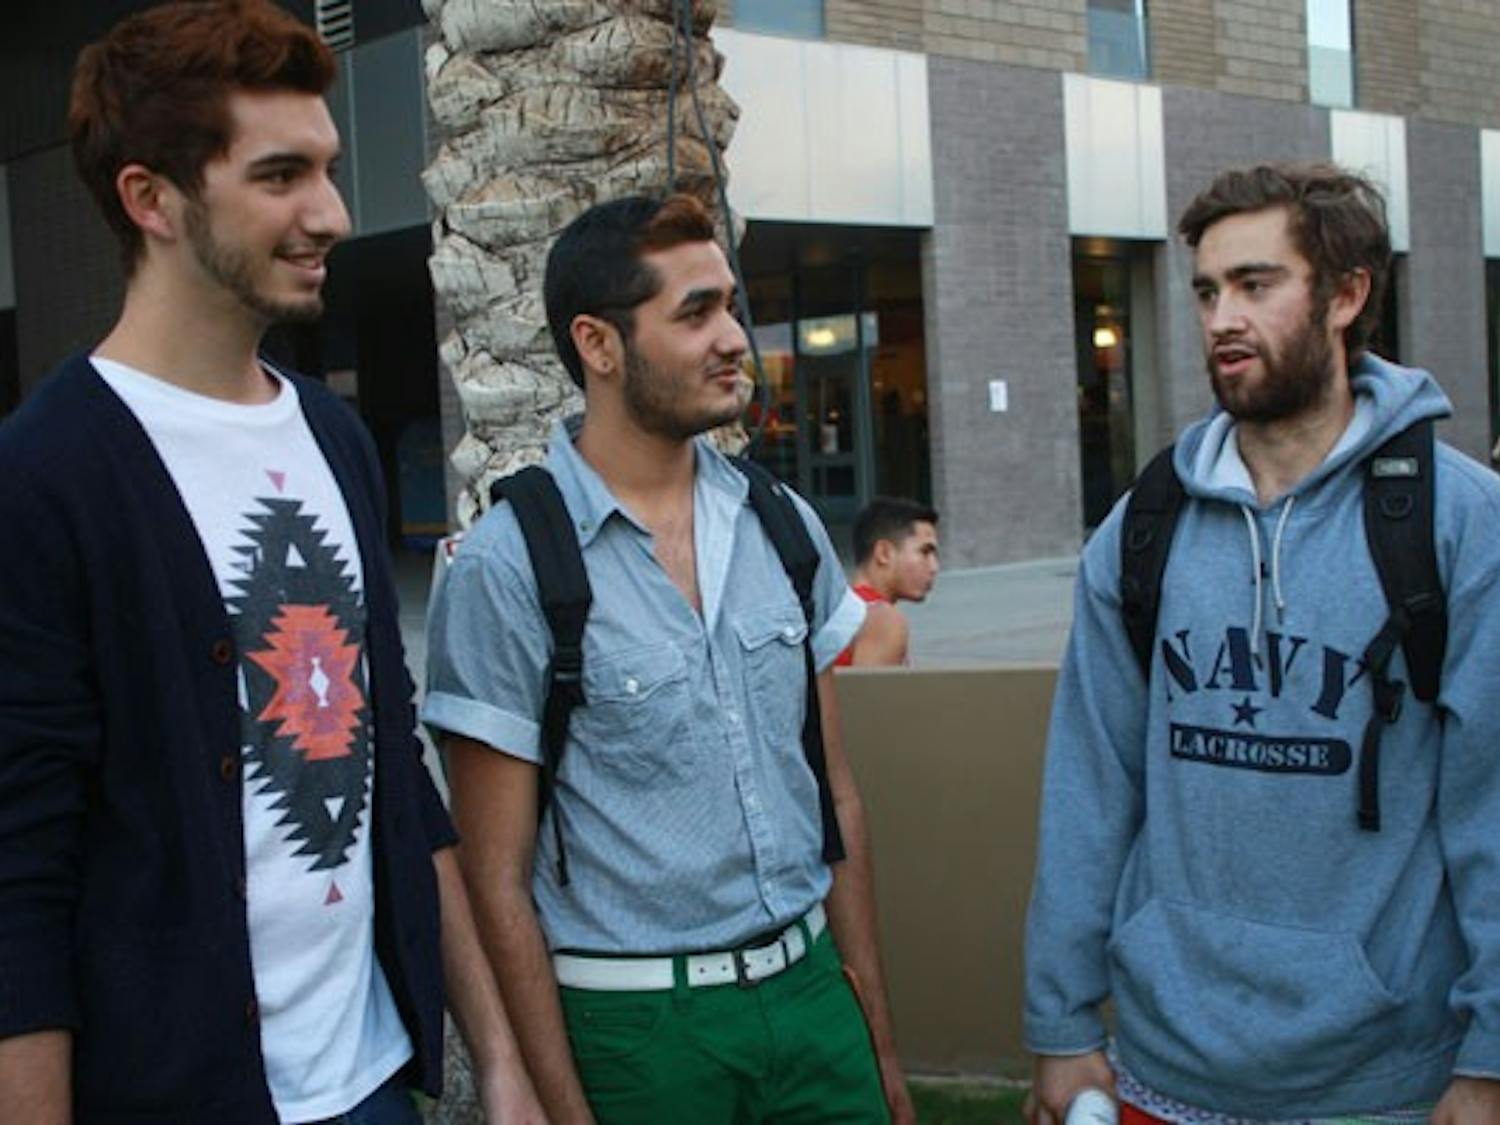 Sustainability junior Chris Moorman, theatre freshman Imran Malik and business sophomore John Tarbox are all participated in No Shave November. The idea of not having to get up every morning and shave really appealed to these young students. (Photo by Hector Salas Almeida)